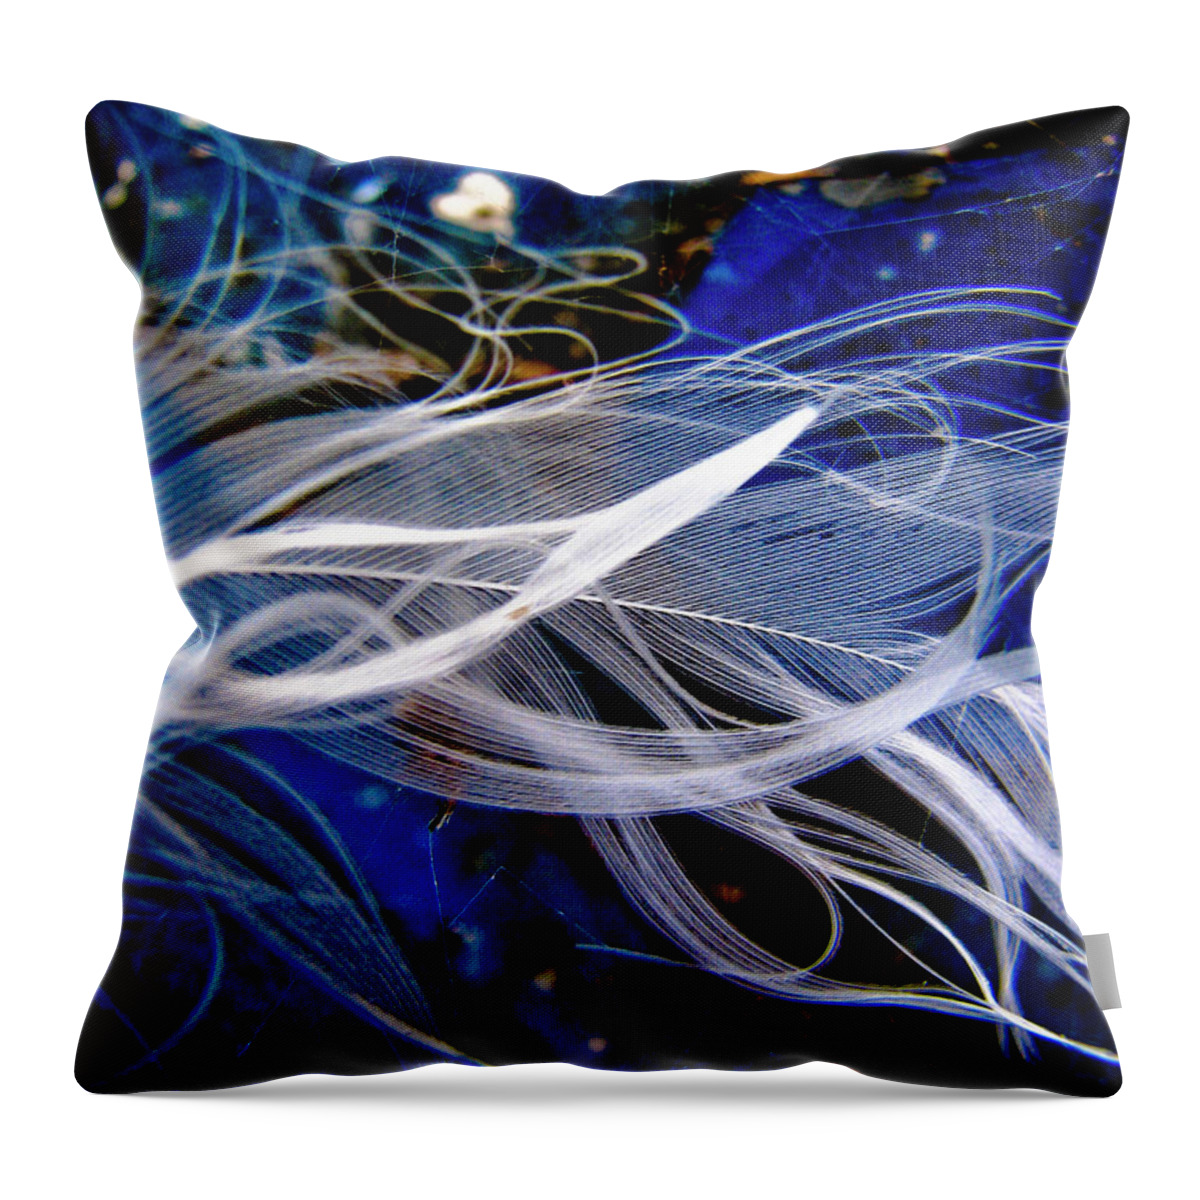 Outdoors Throw Pillow featuring the photograph Caught Up by Emily Higginson